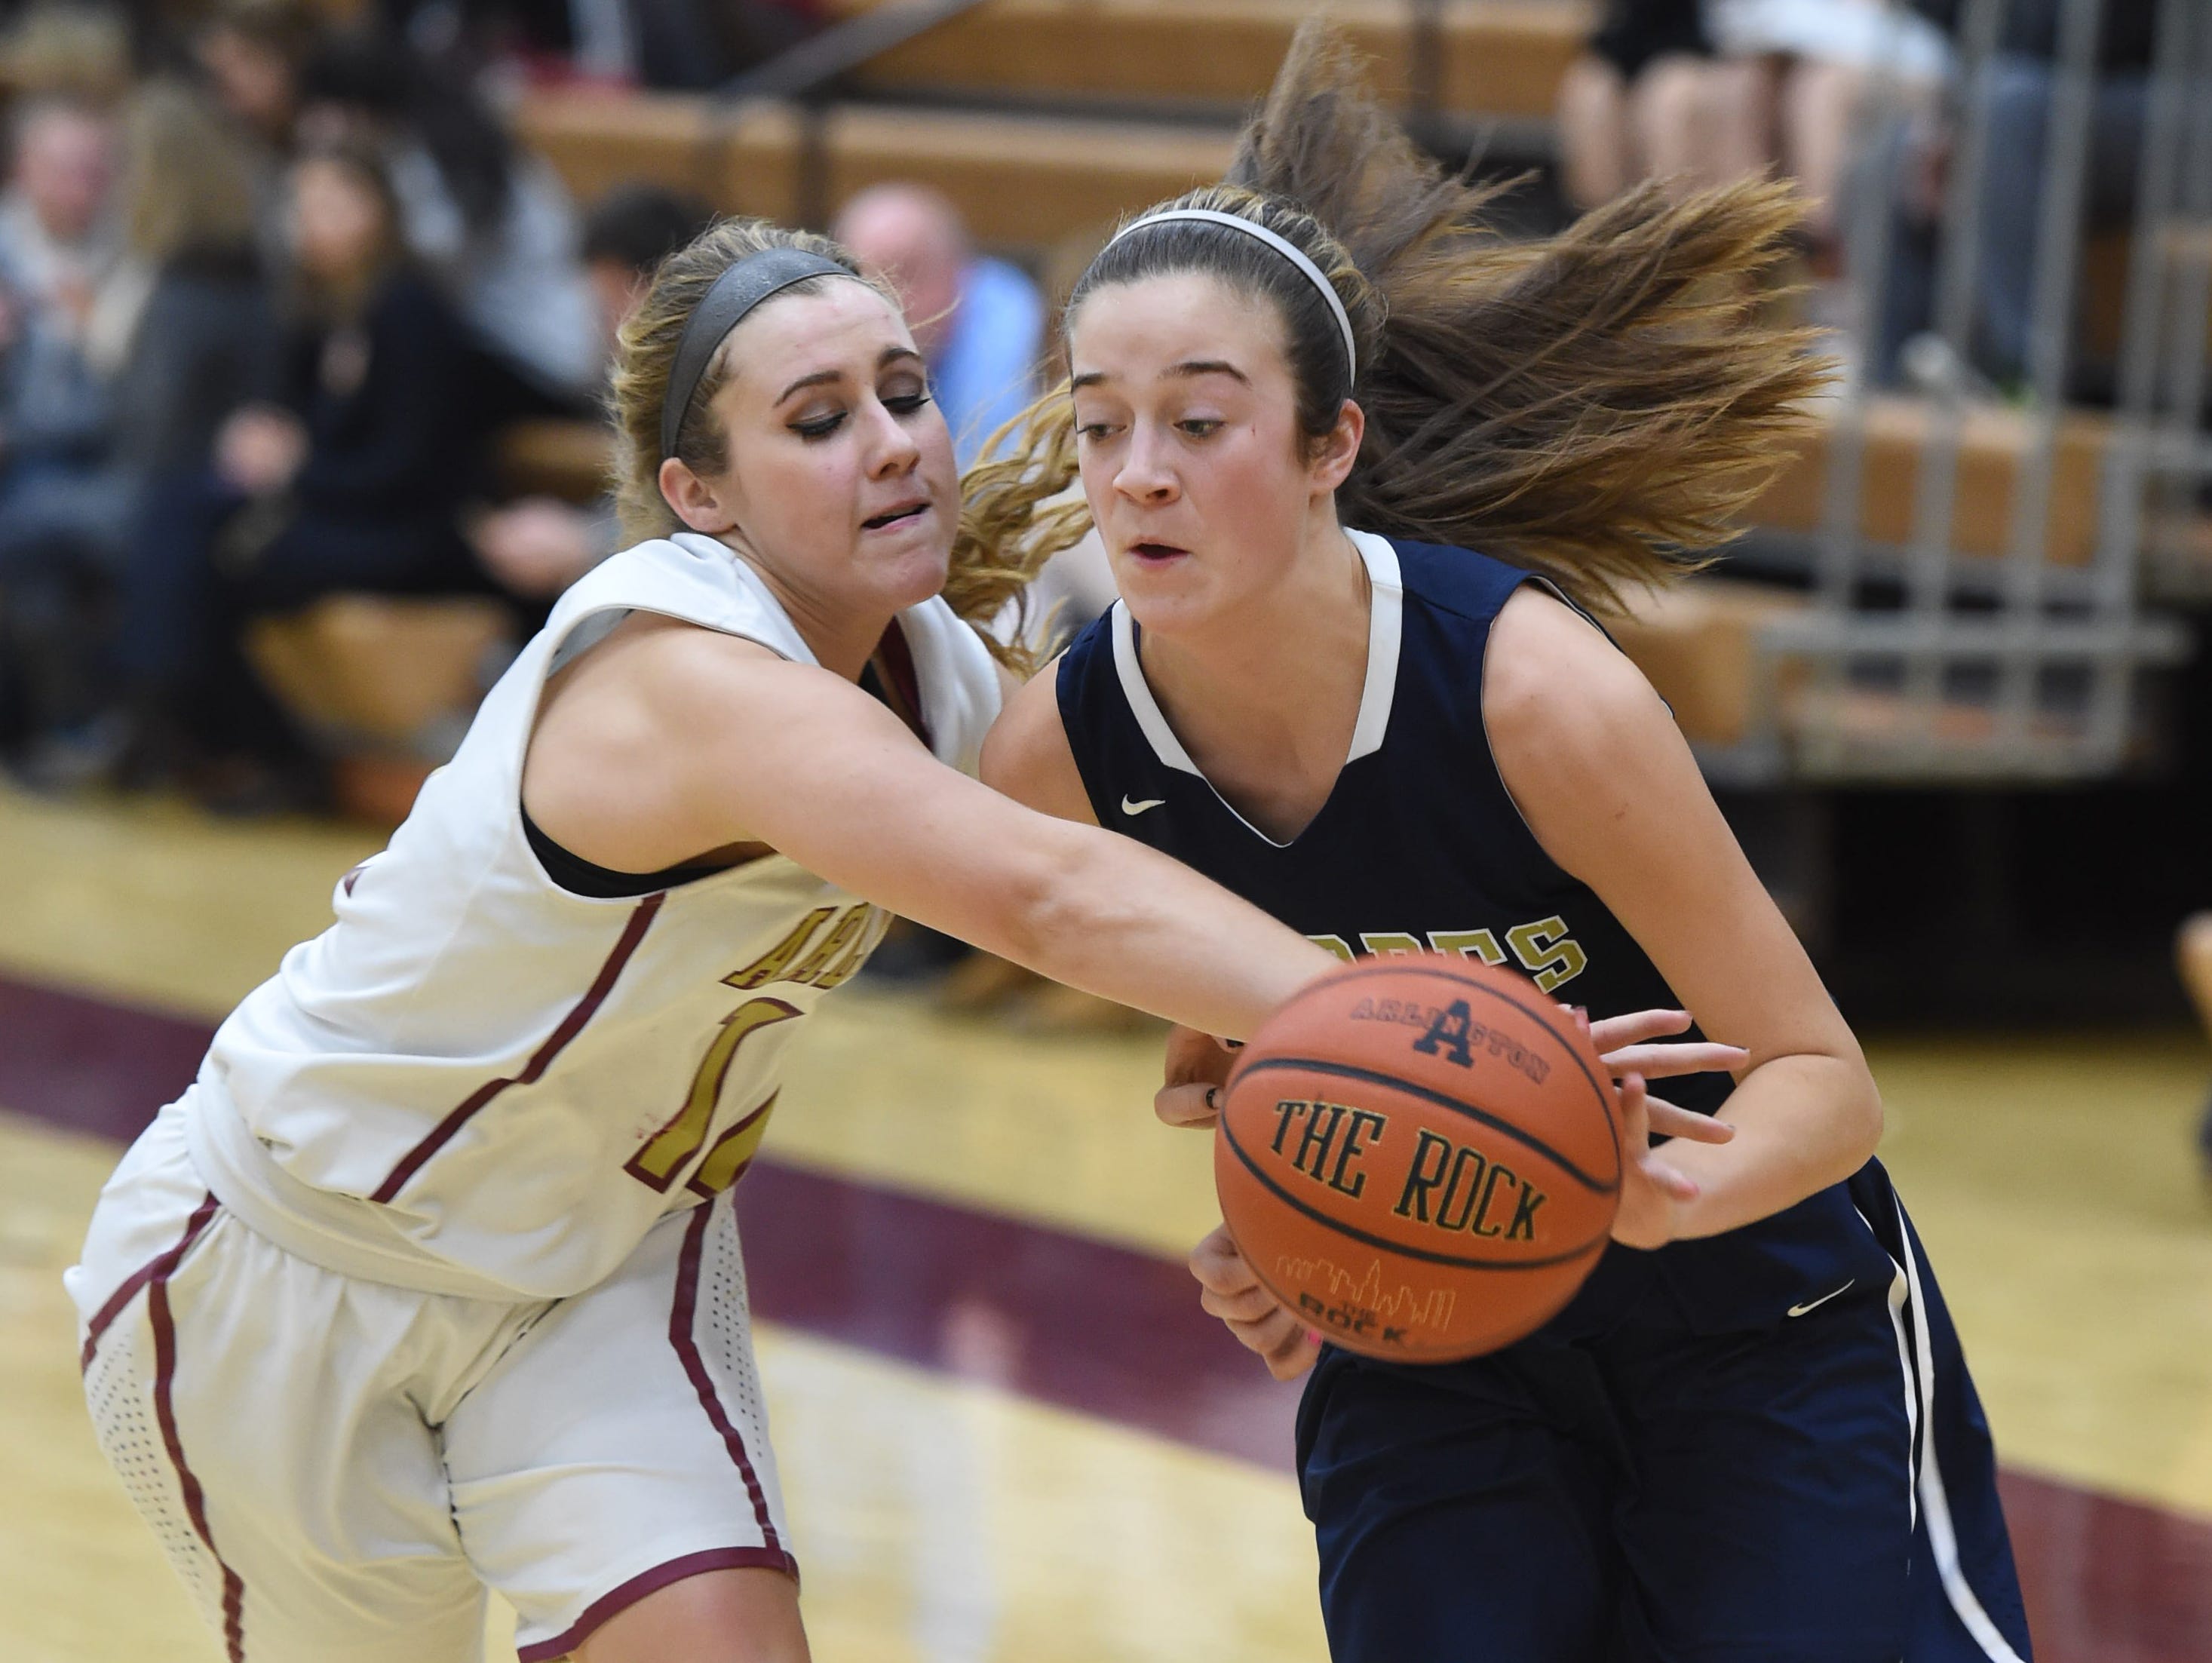 Arlington's Cassidy Clay slaps the ball away from Lourdes' Madison Siegrist during Wednesday's game at Arlington.